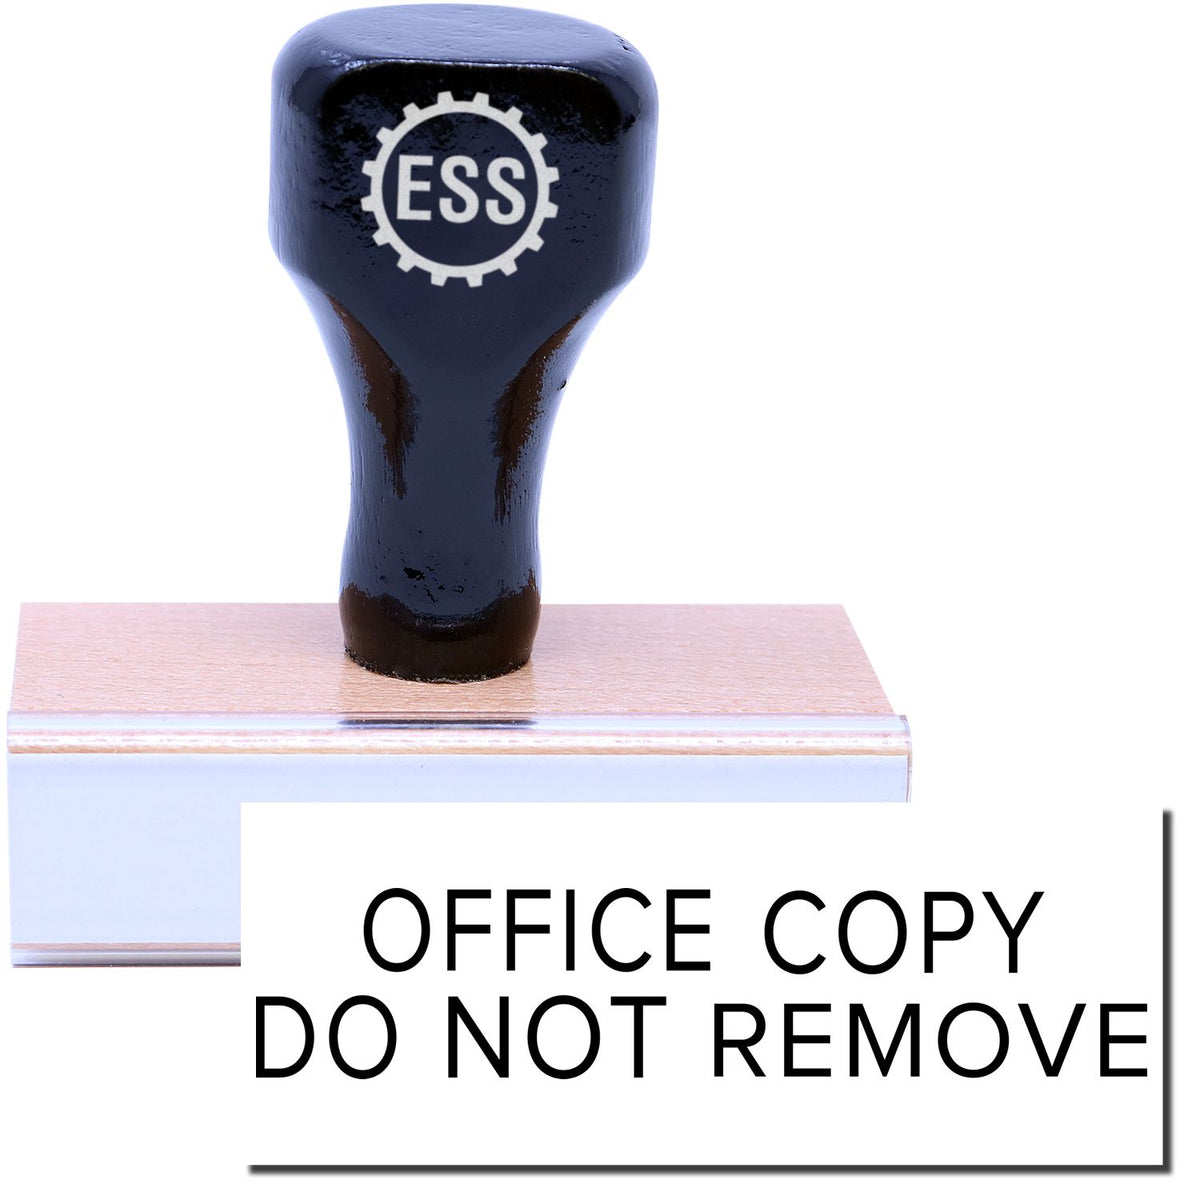 A stock office rubber stamp with a stamped image showing how the text &quot;OFFICE COPY DO NOT REMOVE&quot; in a large narrow font is displayed after stamping.